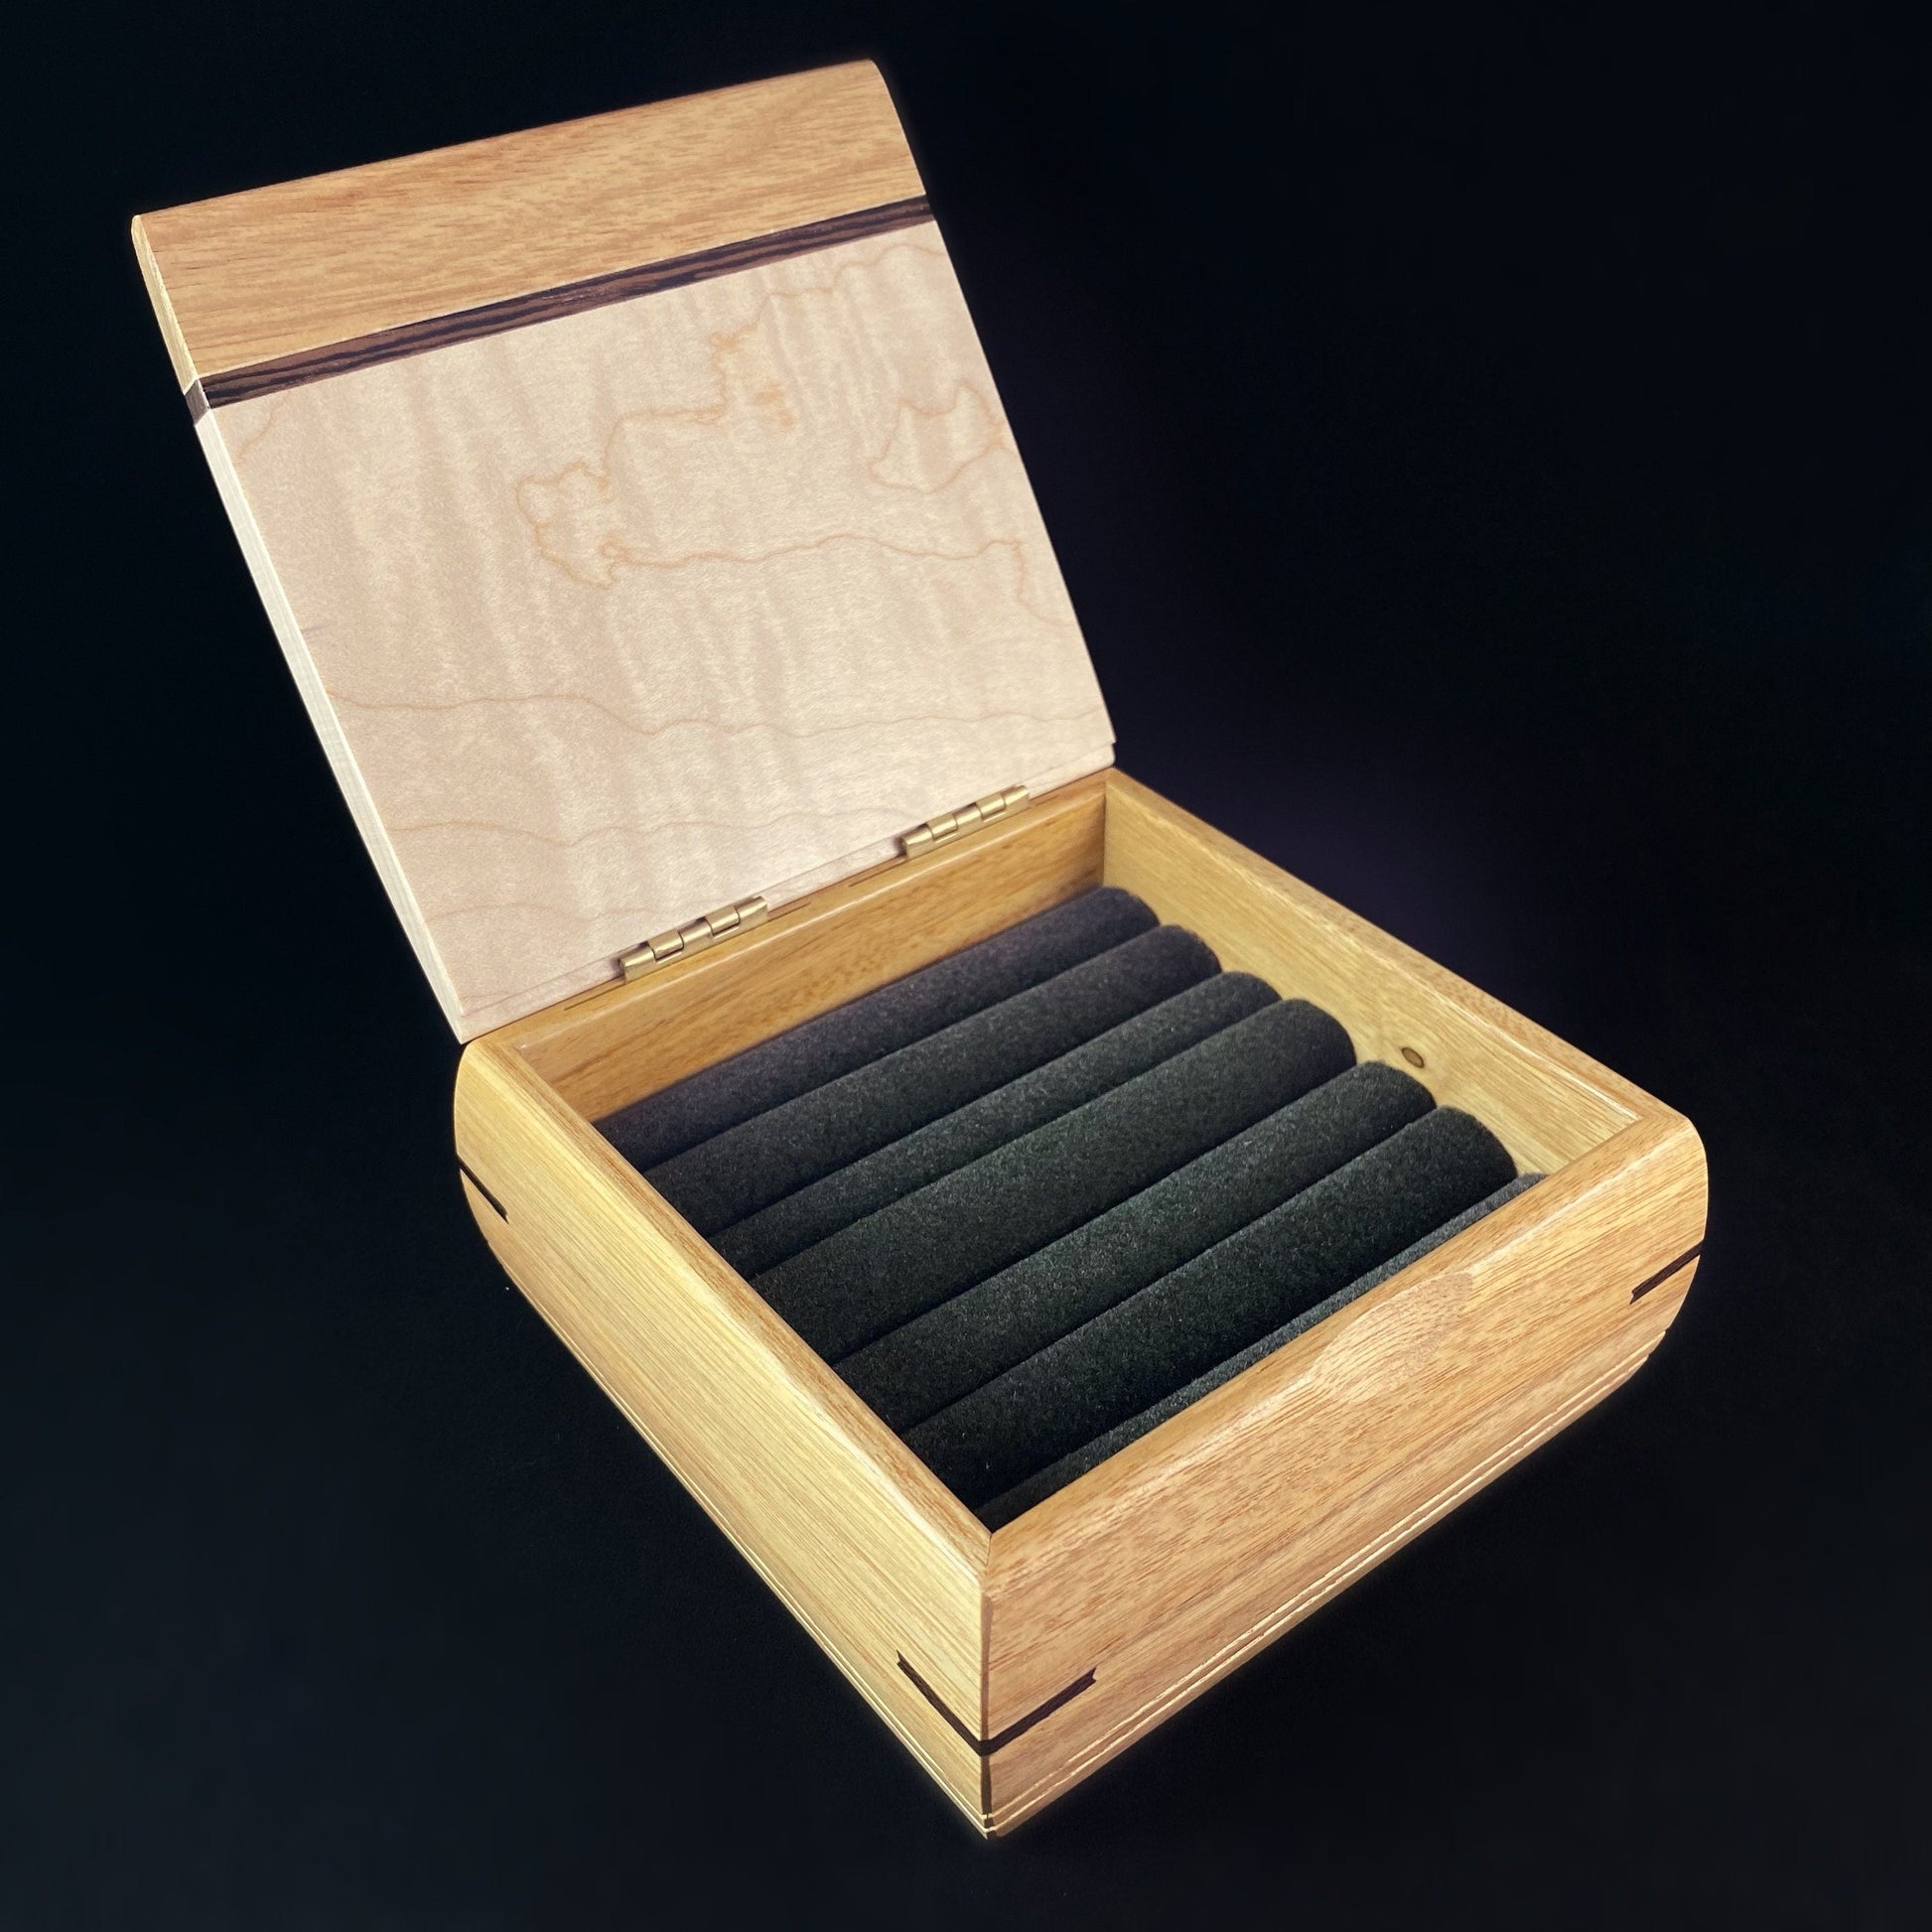 Ring Bearer Box with Canary Wood, Curly Maple, Wenge - Made in USA